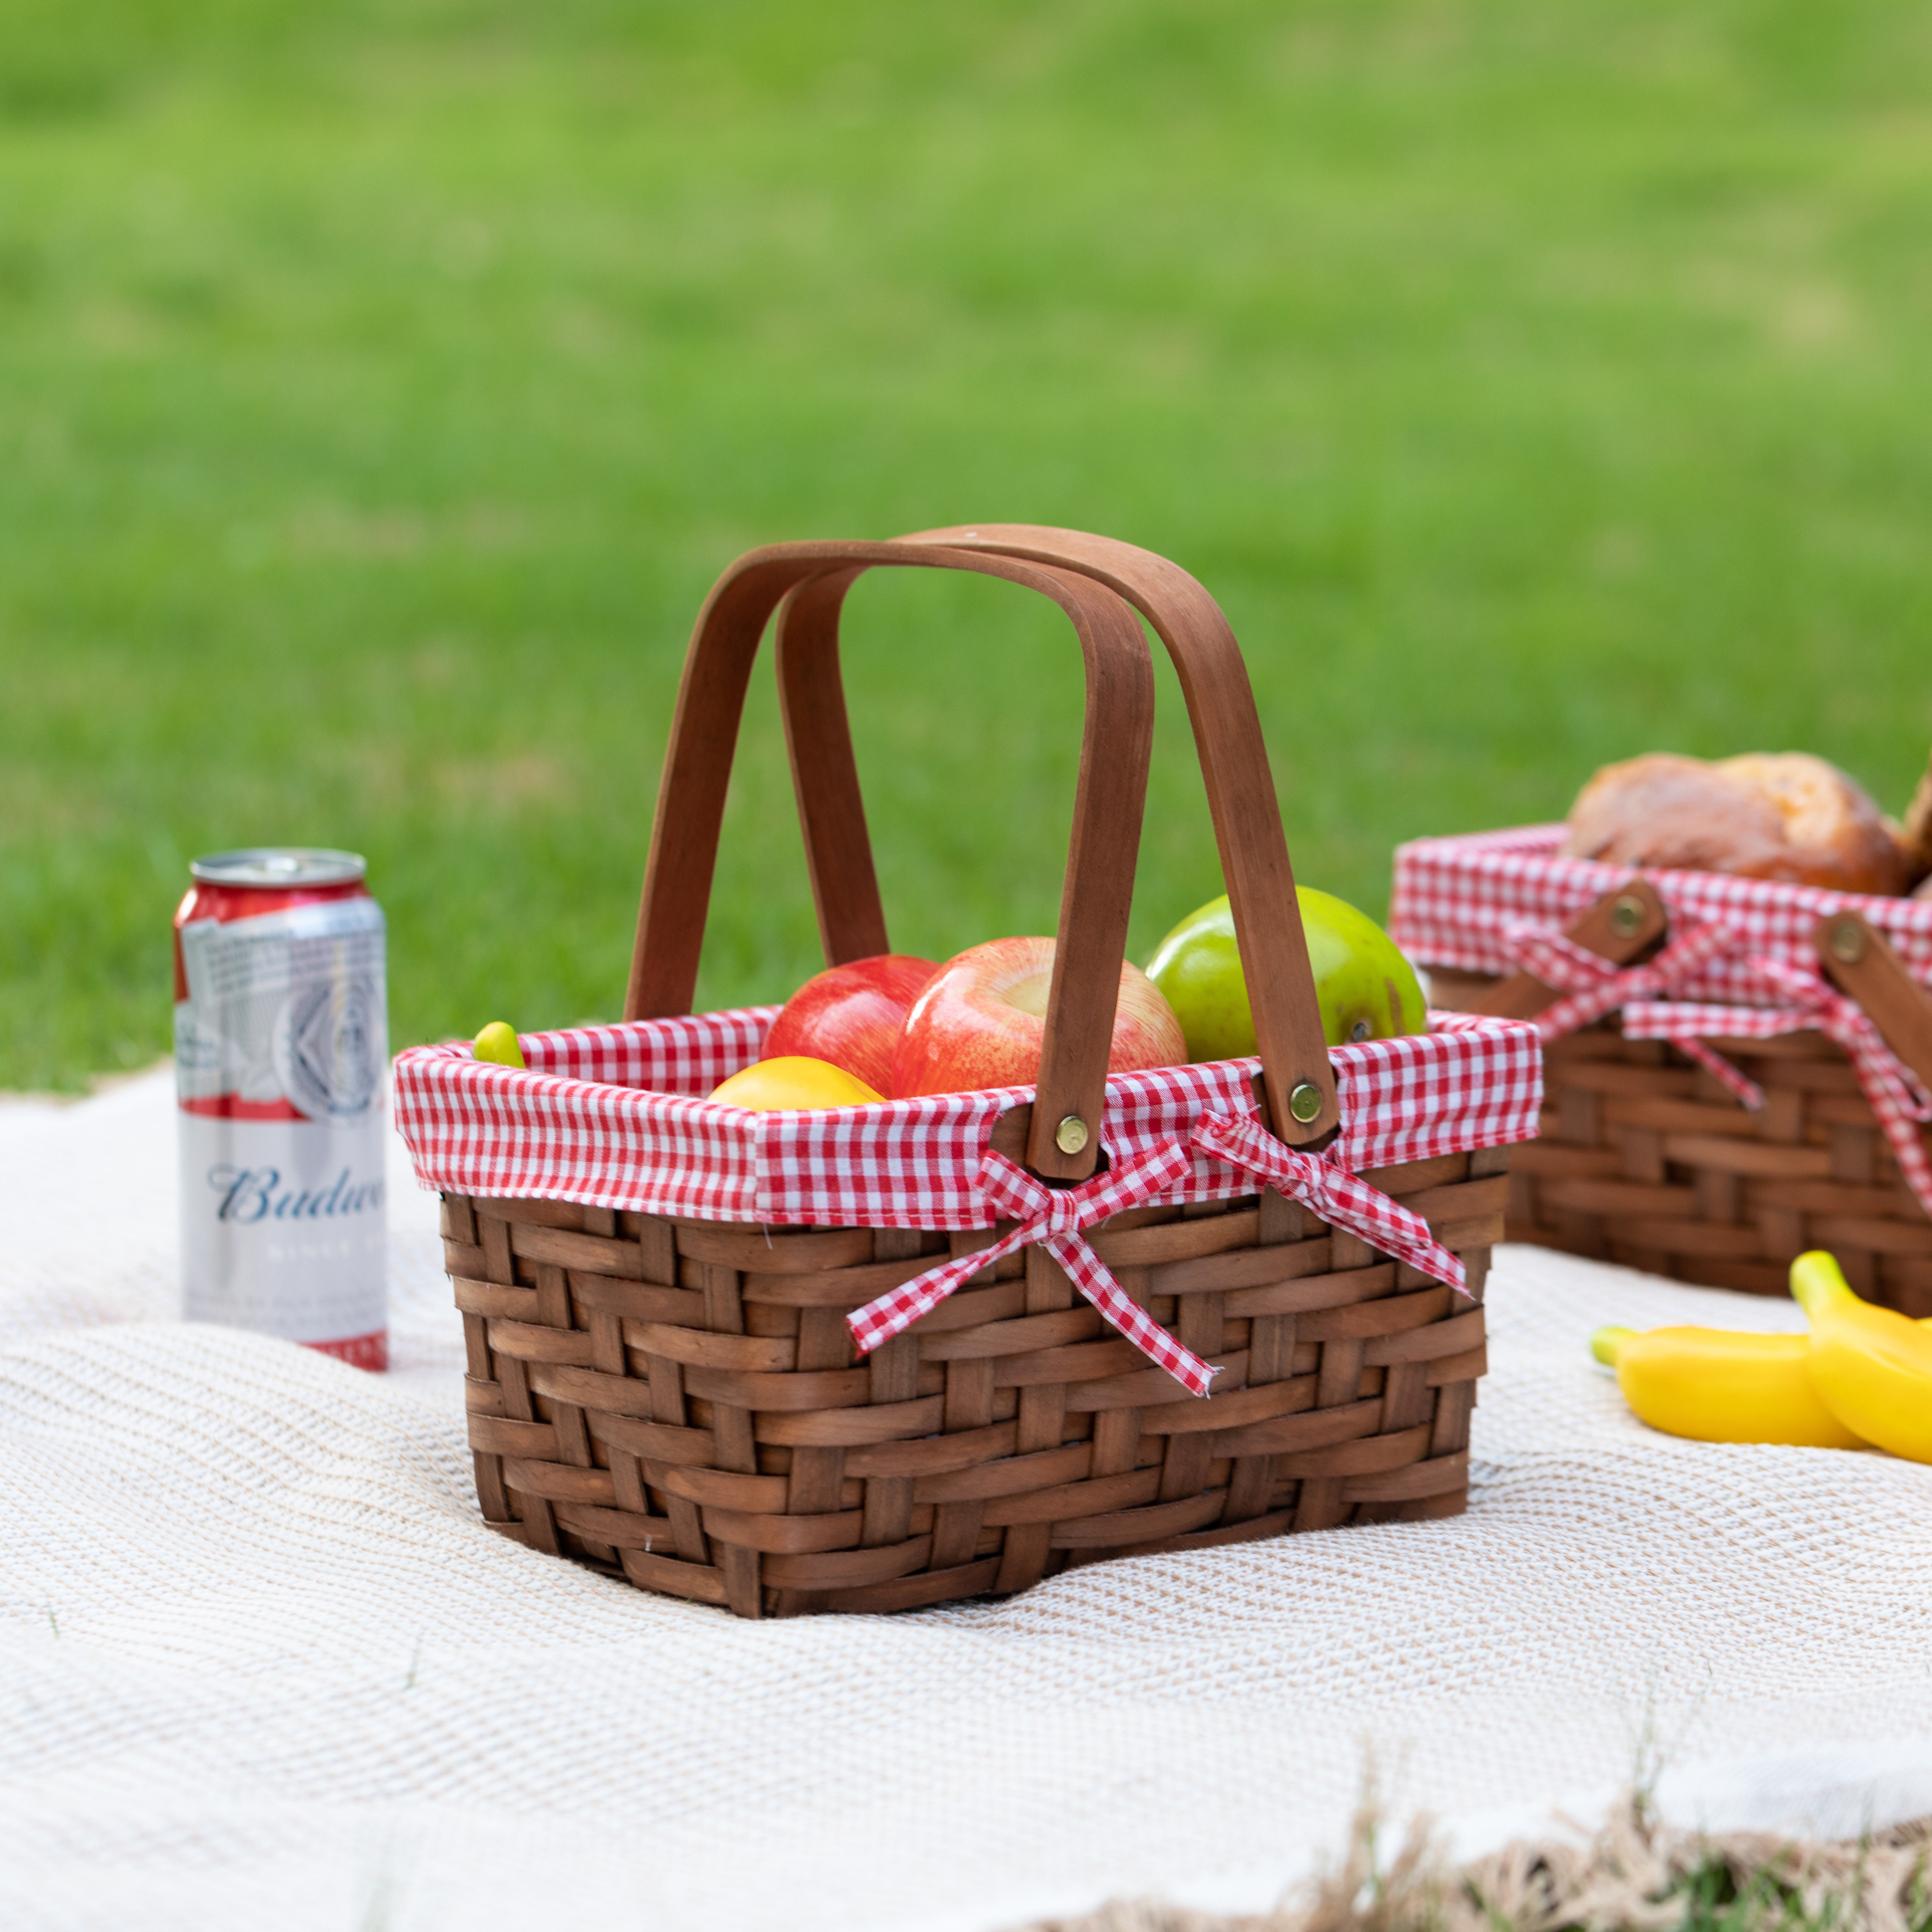 Rectangular Picnic Basket Lined With Gingham Lining - Pack Of 36